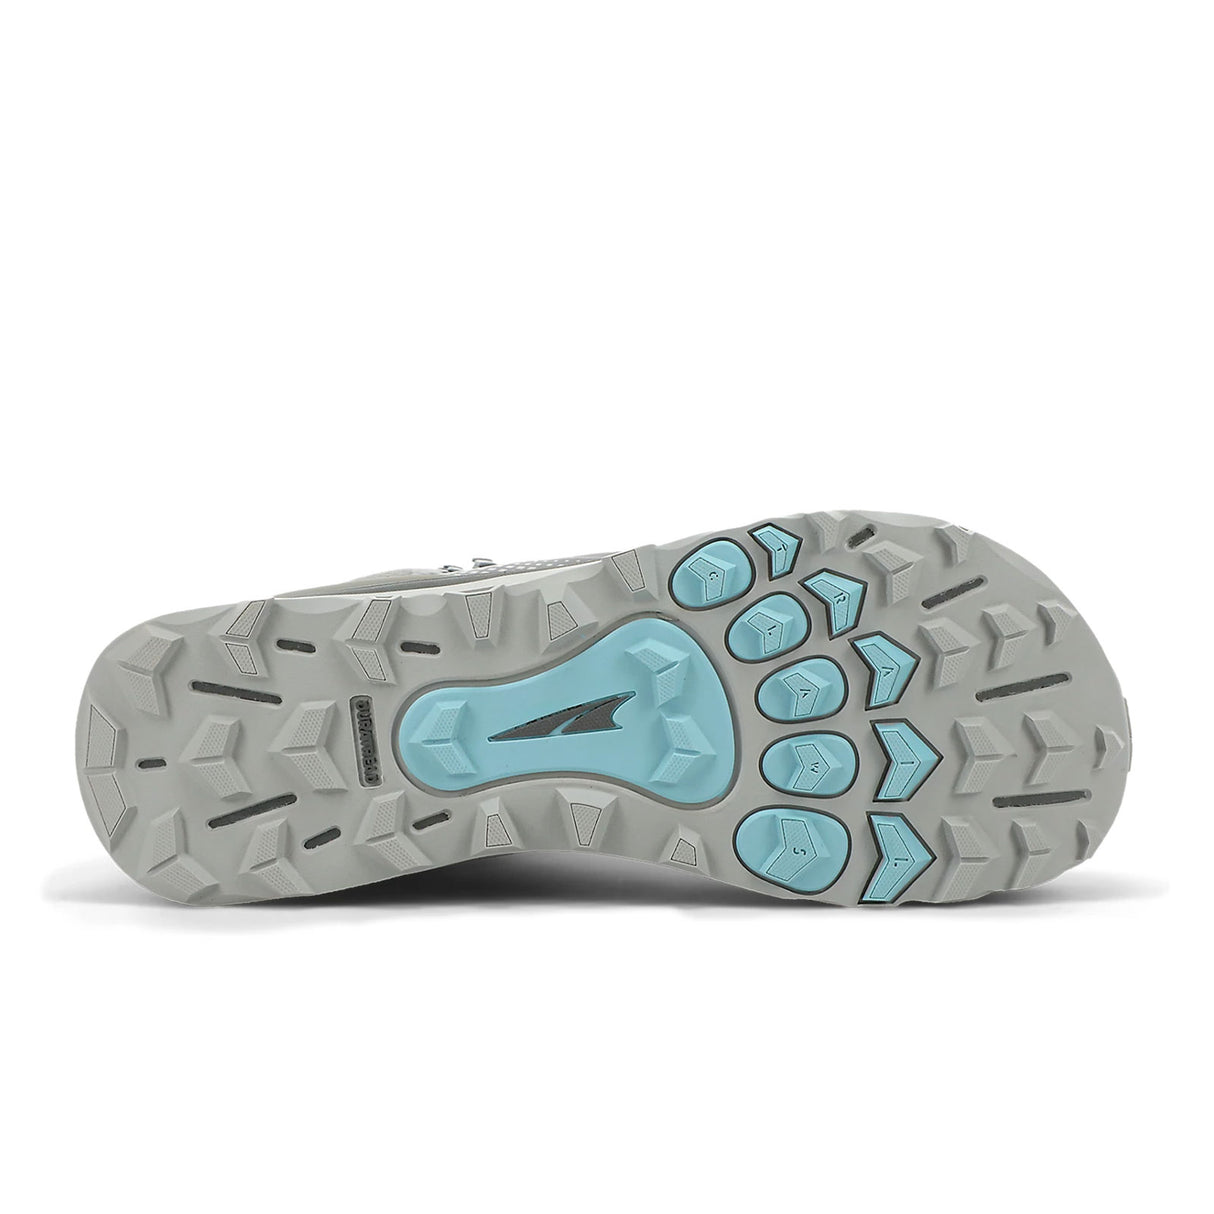 Altra Lone Peak All-Weather Mid (Women) - Gray/Green Boots - Hiking - Mid - The Heel Shoe Fitters